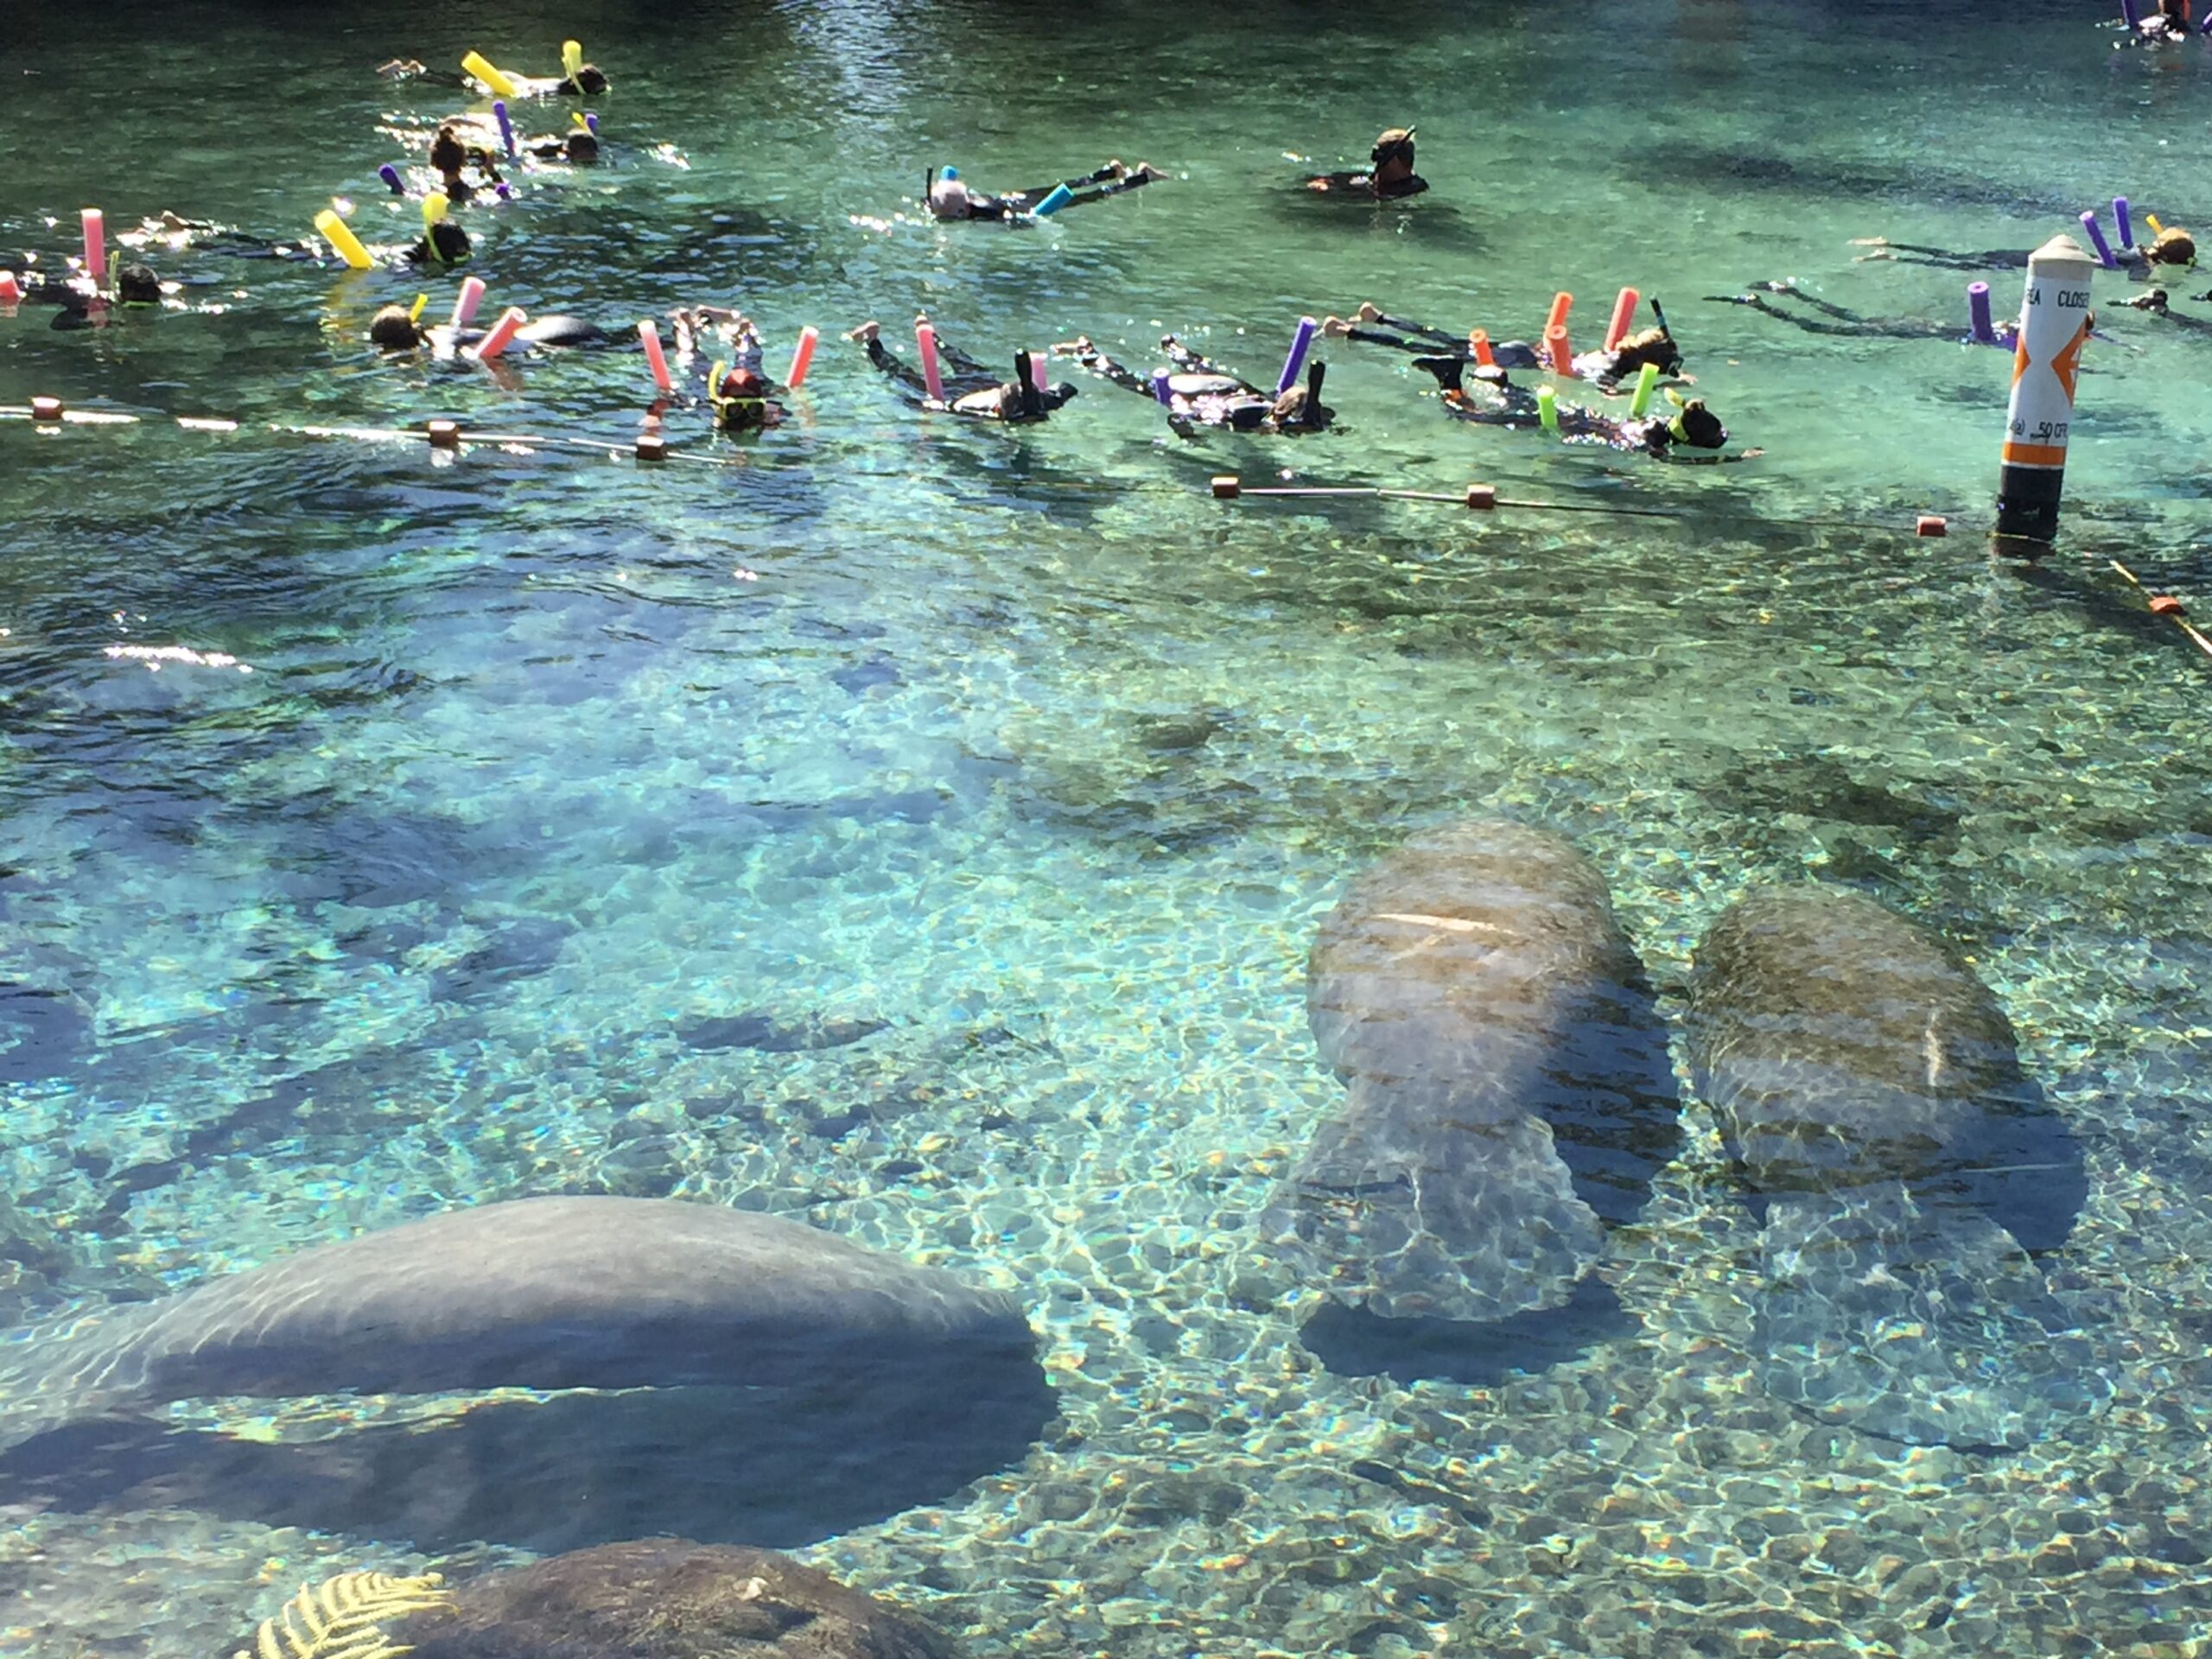 Manatees and swimmers looking from the boardwalk